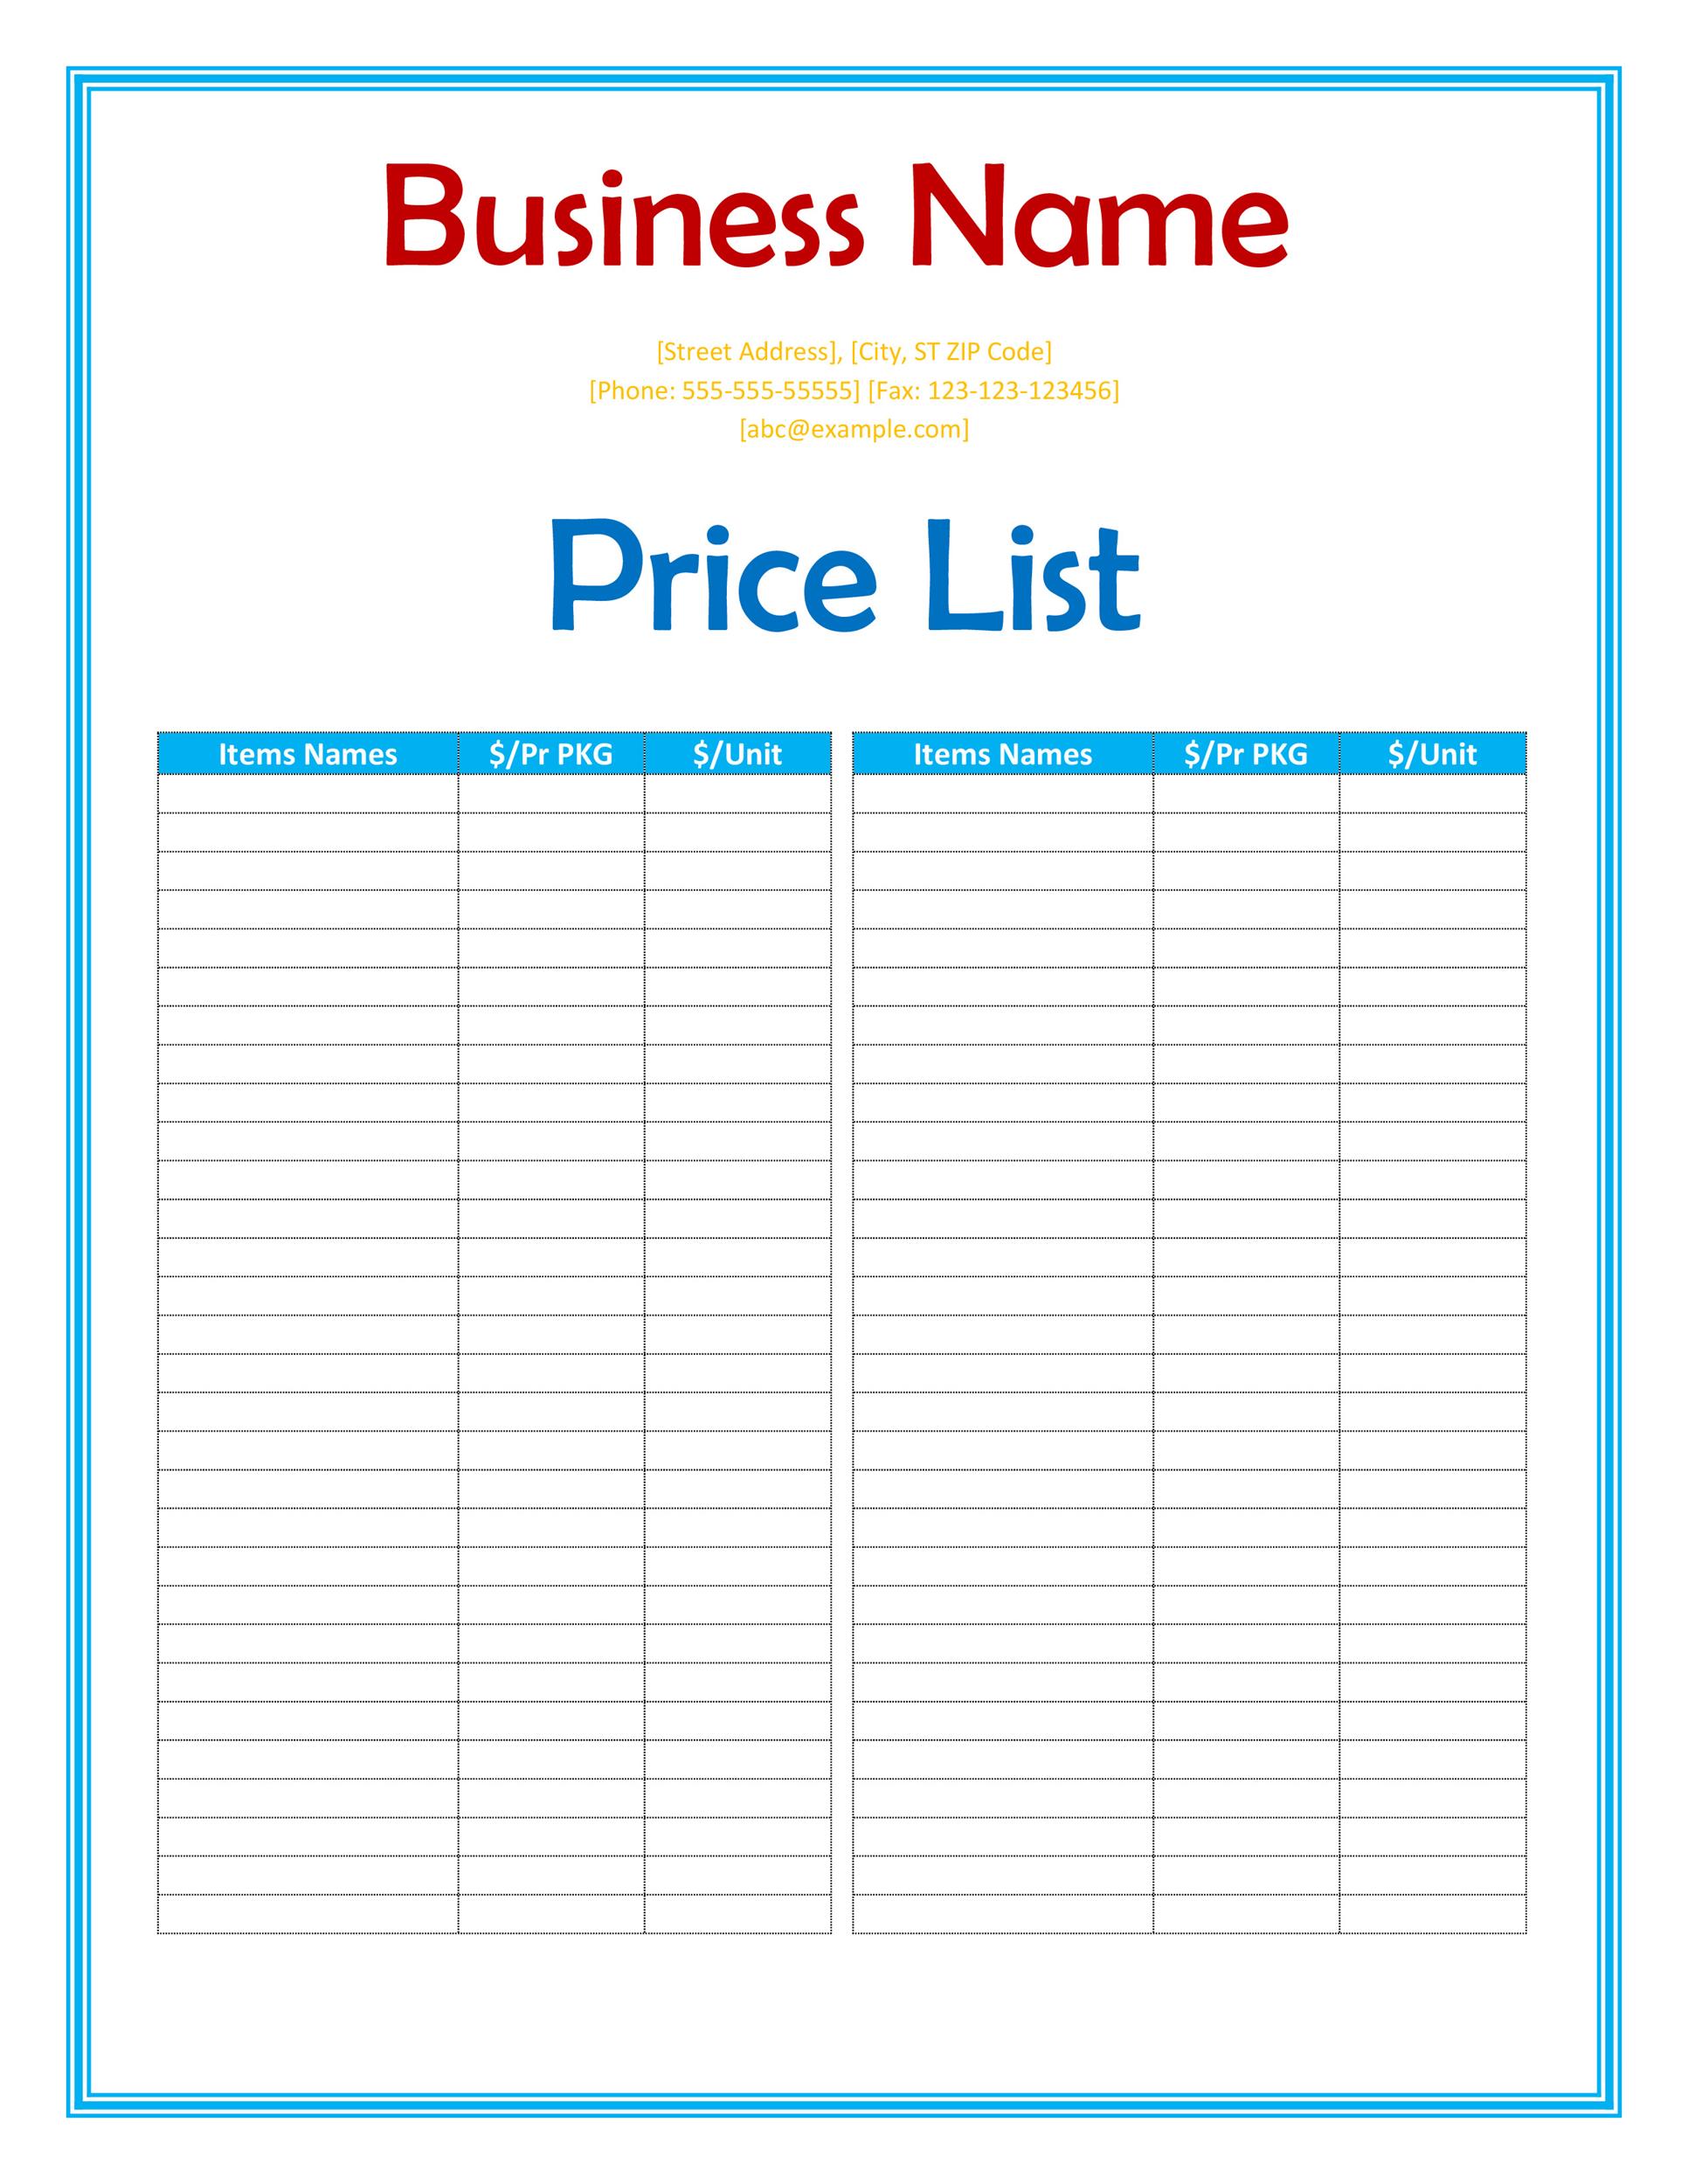 Beauty Price List Template Free from templatelab.com